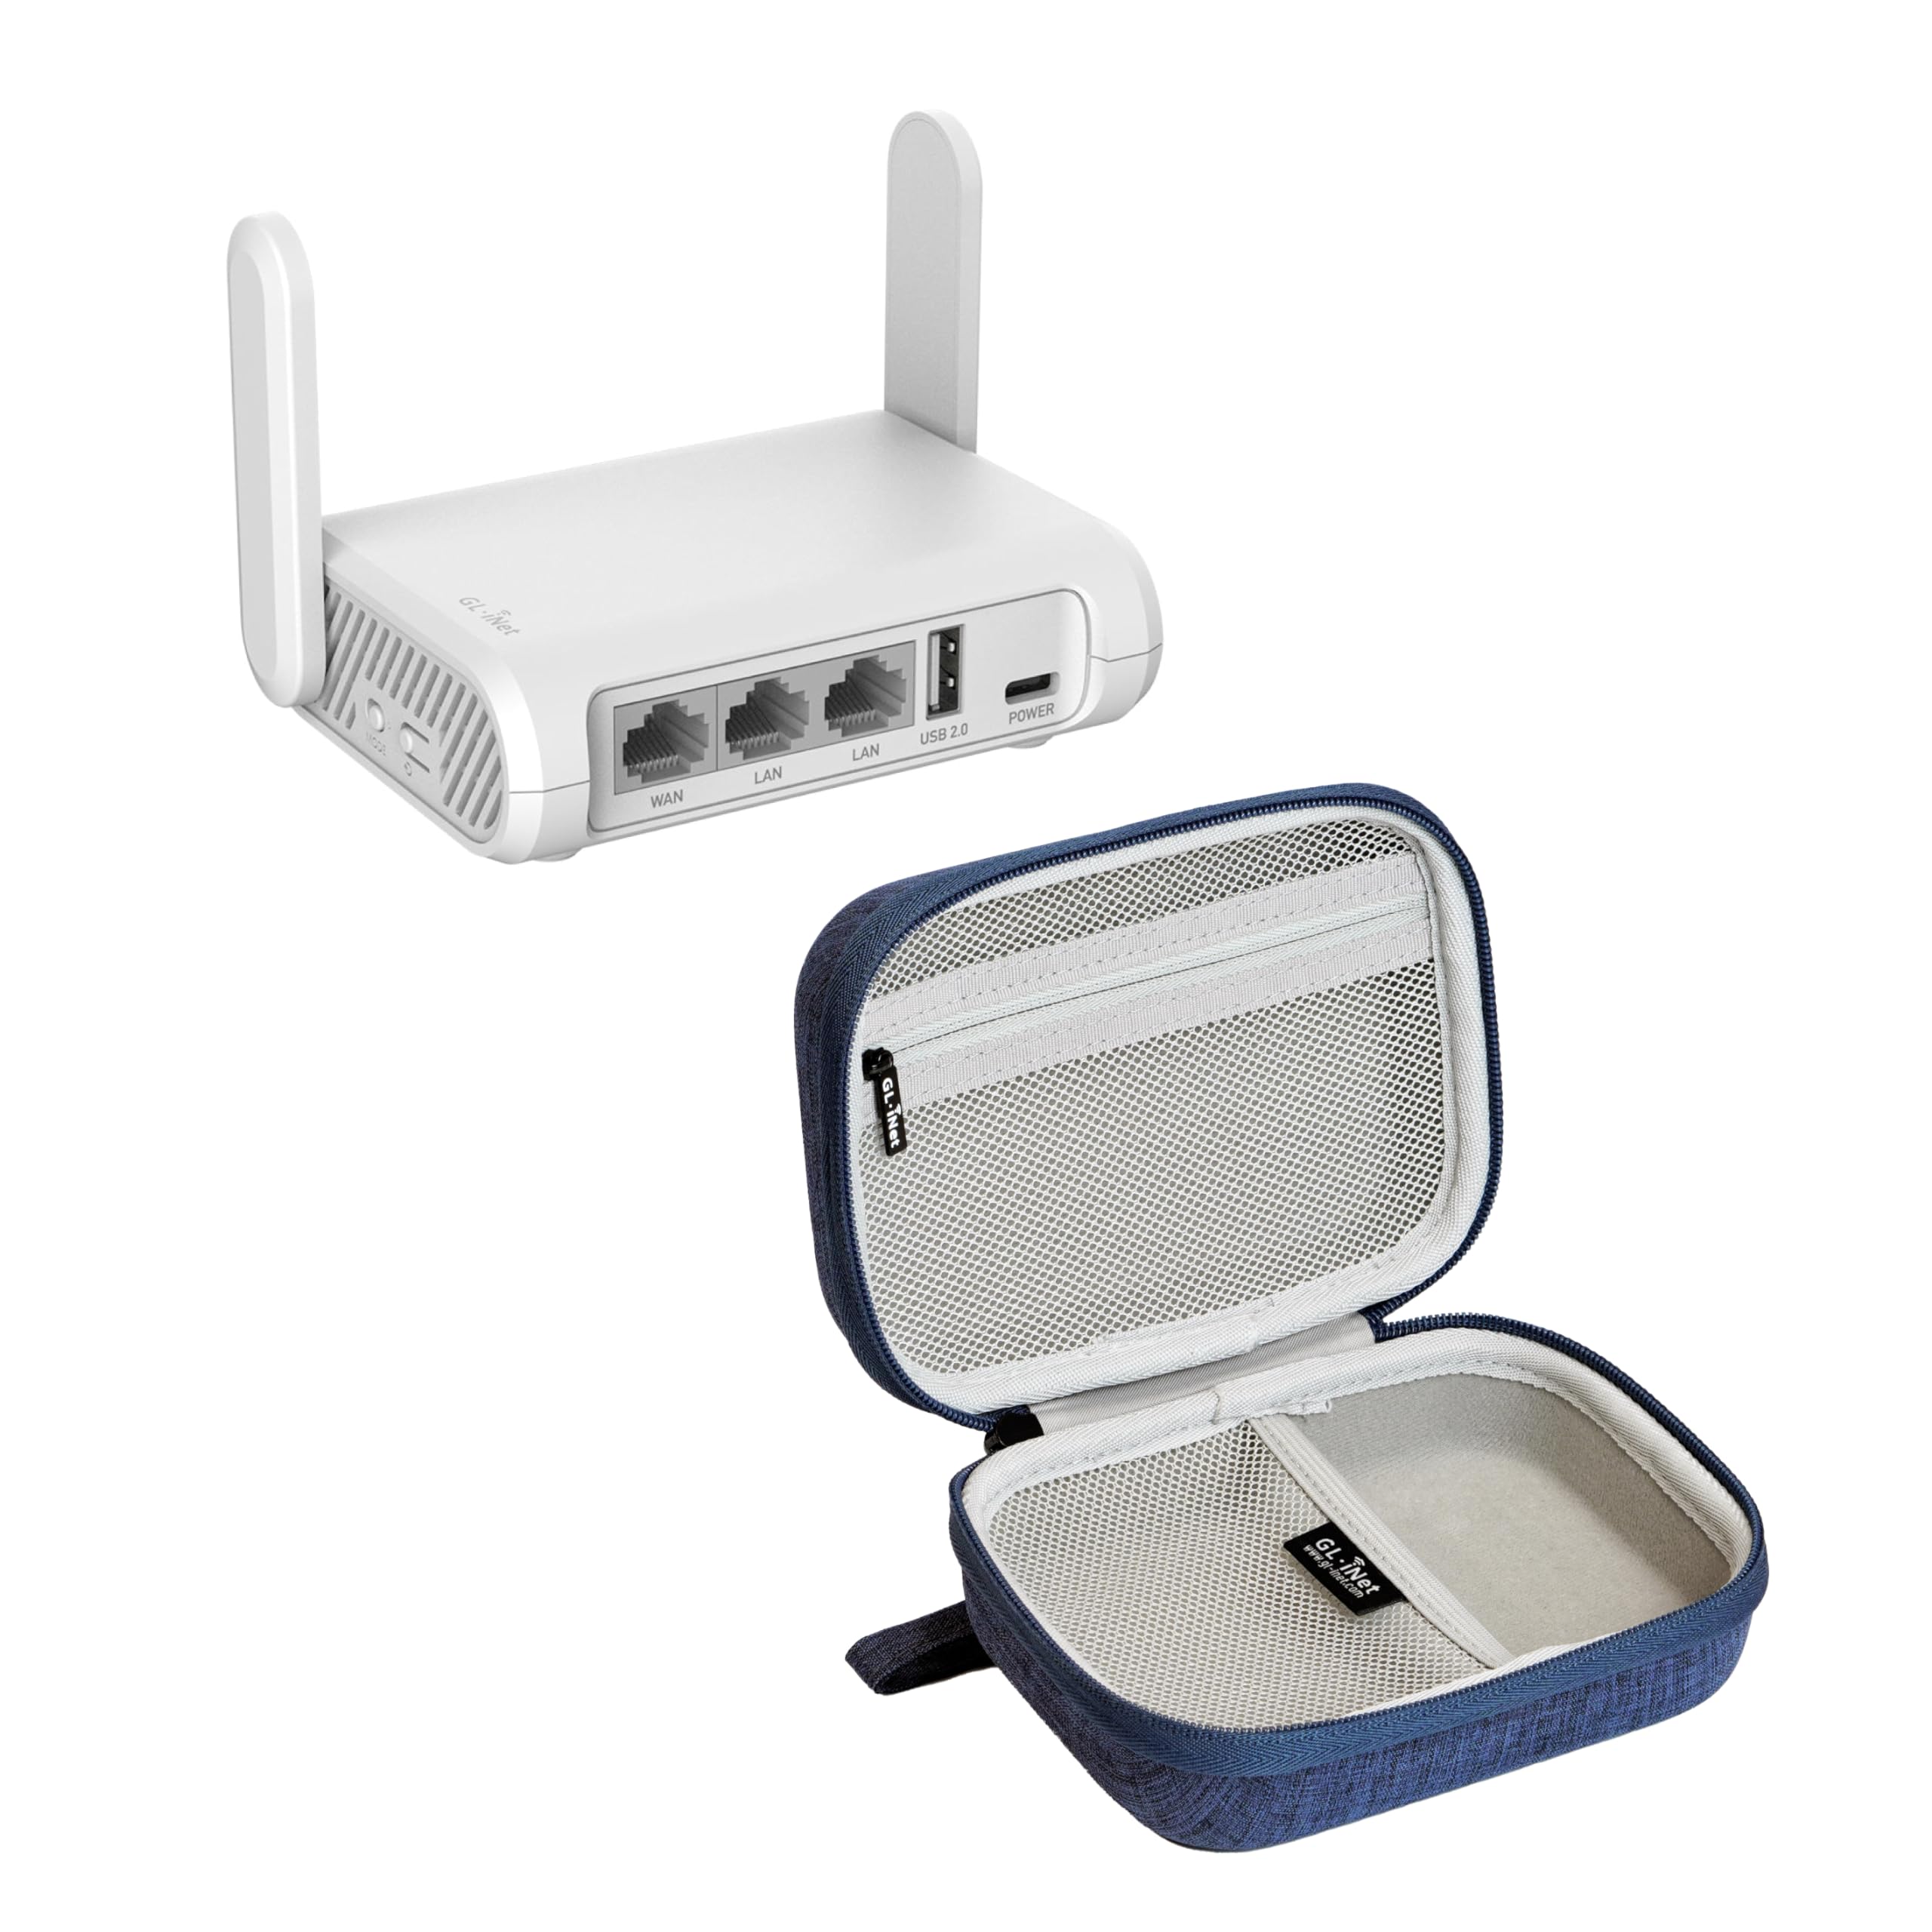 GL.iNet GL-SFT1200 (Opal) Secure Travel WiFi Router & GL.iNet Gadget Organizer Case for Travel Routers (Blue)